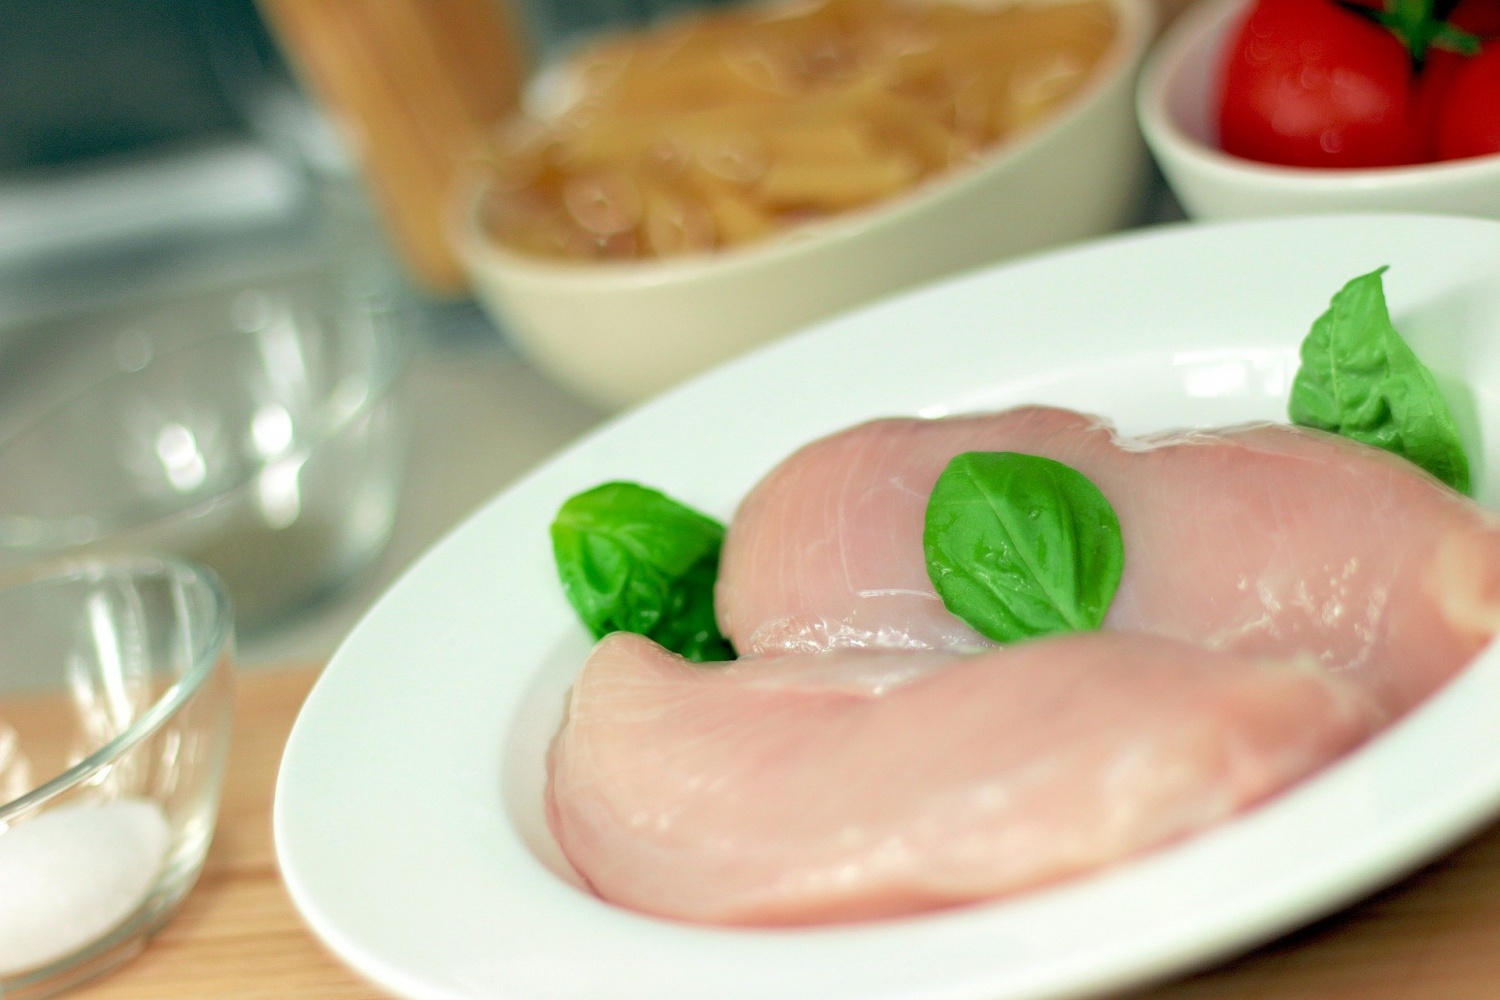 lab-grown chicken approved in Singapore